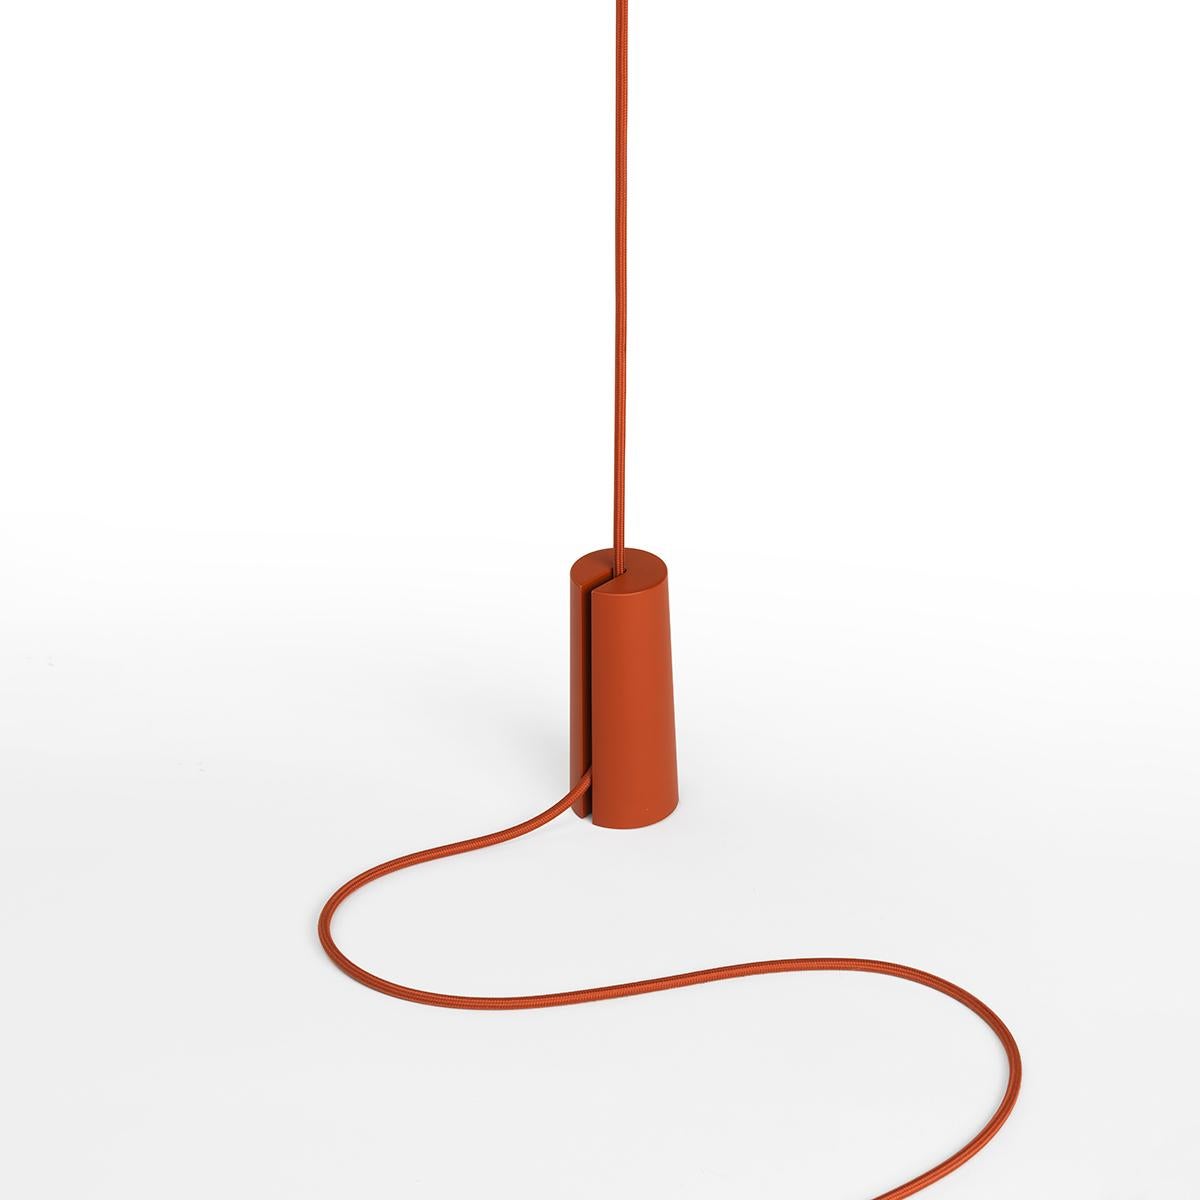 Skynest Motion Floor Lamp in Brick Red by Marcel Wanders, 2022

Diffuse lighting hanging appliance. The dome is a combination of luminous and dark elements arranged into a network and formed of core structures covered with a thin interwoven